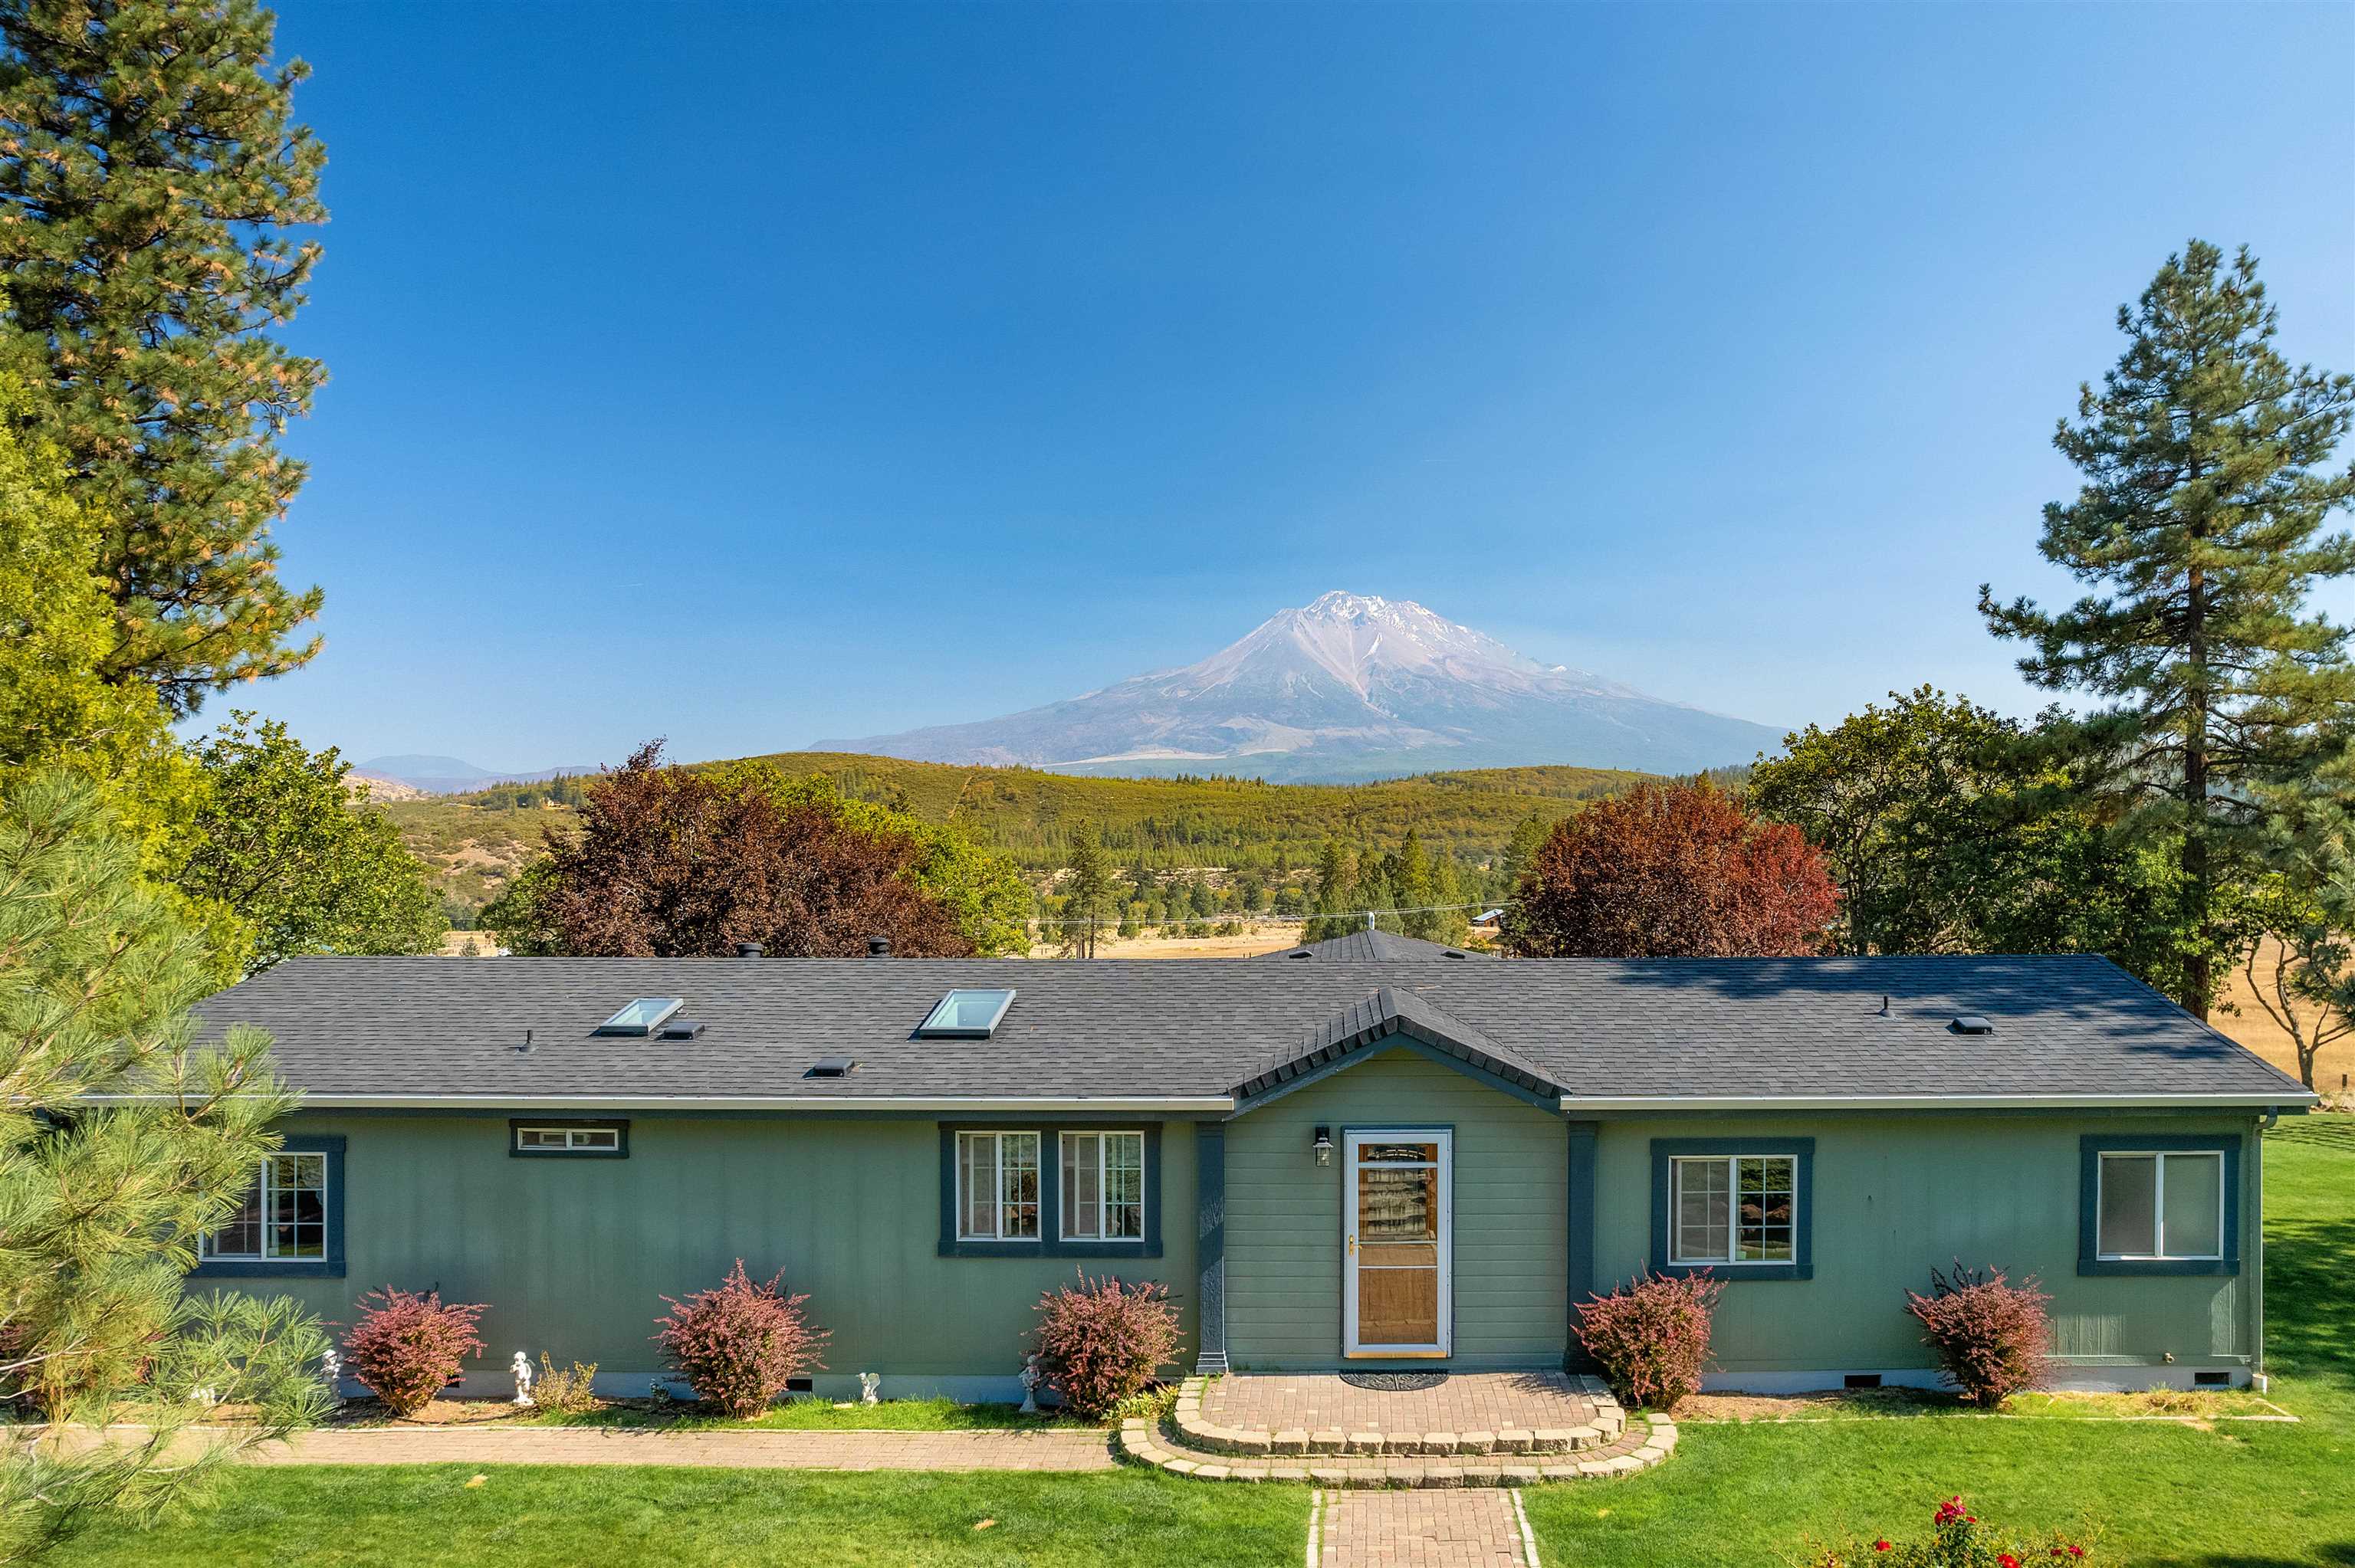 This property has it all, beautiful views of Mt. Shasta & Black Butte. Surrounded by a beautiful, landscaped yard with an underground sprinkler system & shade trees. China Ditch runs through the property with water rights, a pond, field for grazing livestock & a horse shelter. This property sits on over 12 acres with a mix of trees & open spaces. Step into the bright & welcoming move in ready home, that is over 2000 sq ft. The open concept offers a family rm & living rm, open dining area & a large kitchen with stainless steel appliances & granite countertops. The home offers 4 bedrooms & 2 bathrooms. New carpet in all the bedrooms & living area with fresh interior paint in most of the home. Brand new roof & freshly painted deck. Step onto the back deck & entertain your guests under the large gazebo, & soak in all the natural beauty, & wildlife. Paved parking area, large pad cleared for extra parking or ready to be built on. The home has a backup generator, RV parking with hookups. Shed for extra storage & a huge 2000 sq ft shop 40’x50’. With 3 roll up doors. Shop is completely insulated, has a backup generator, heating, & bathroom. Wired with multiple 220 plugs that are 60amp.